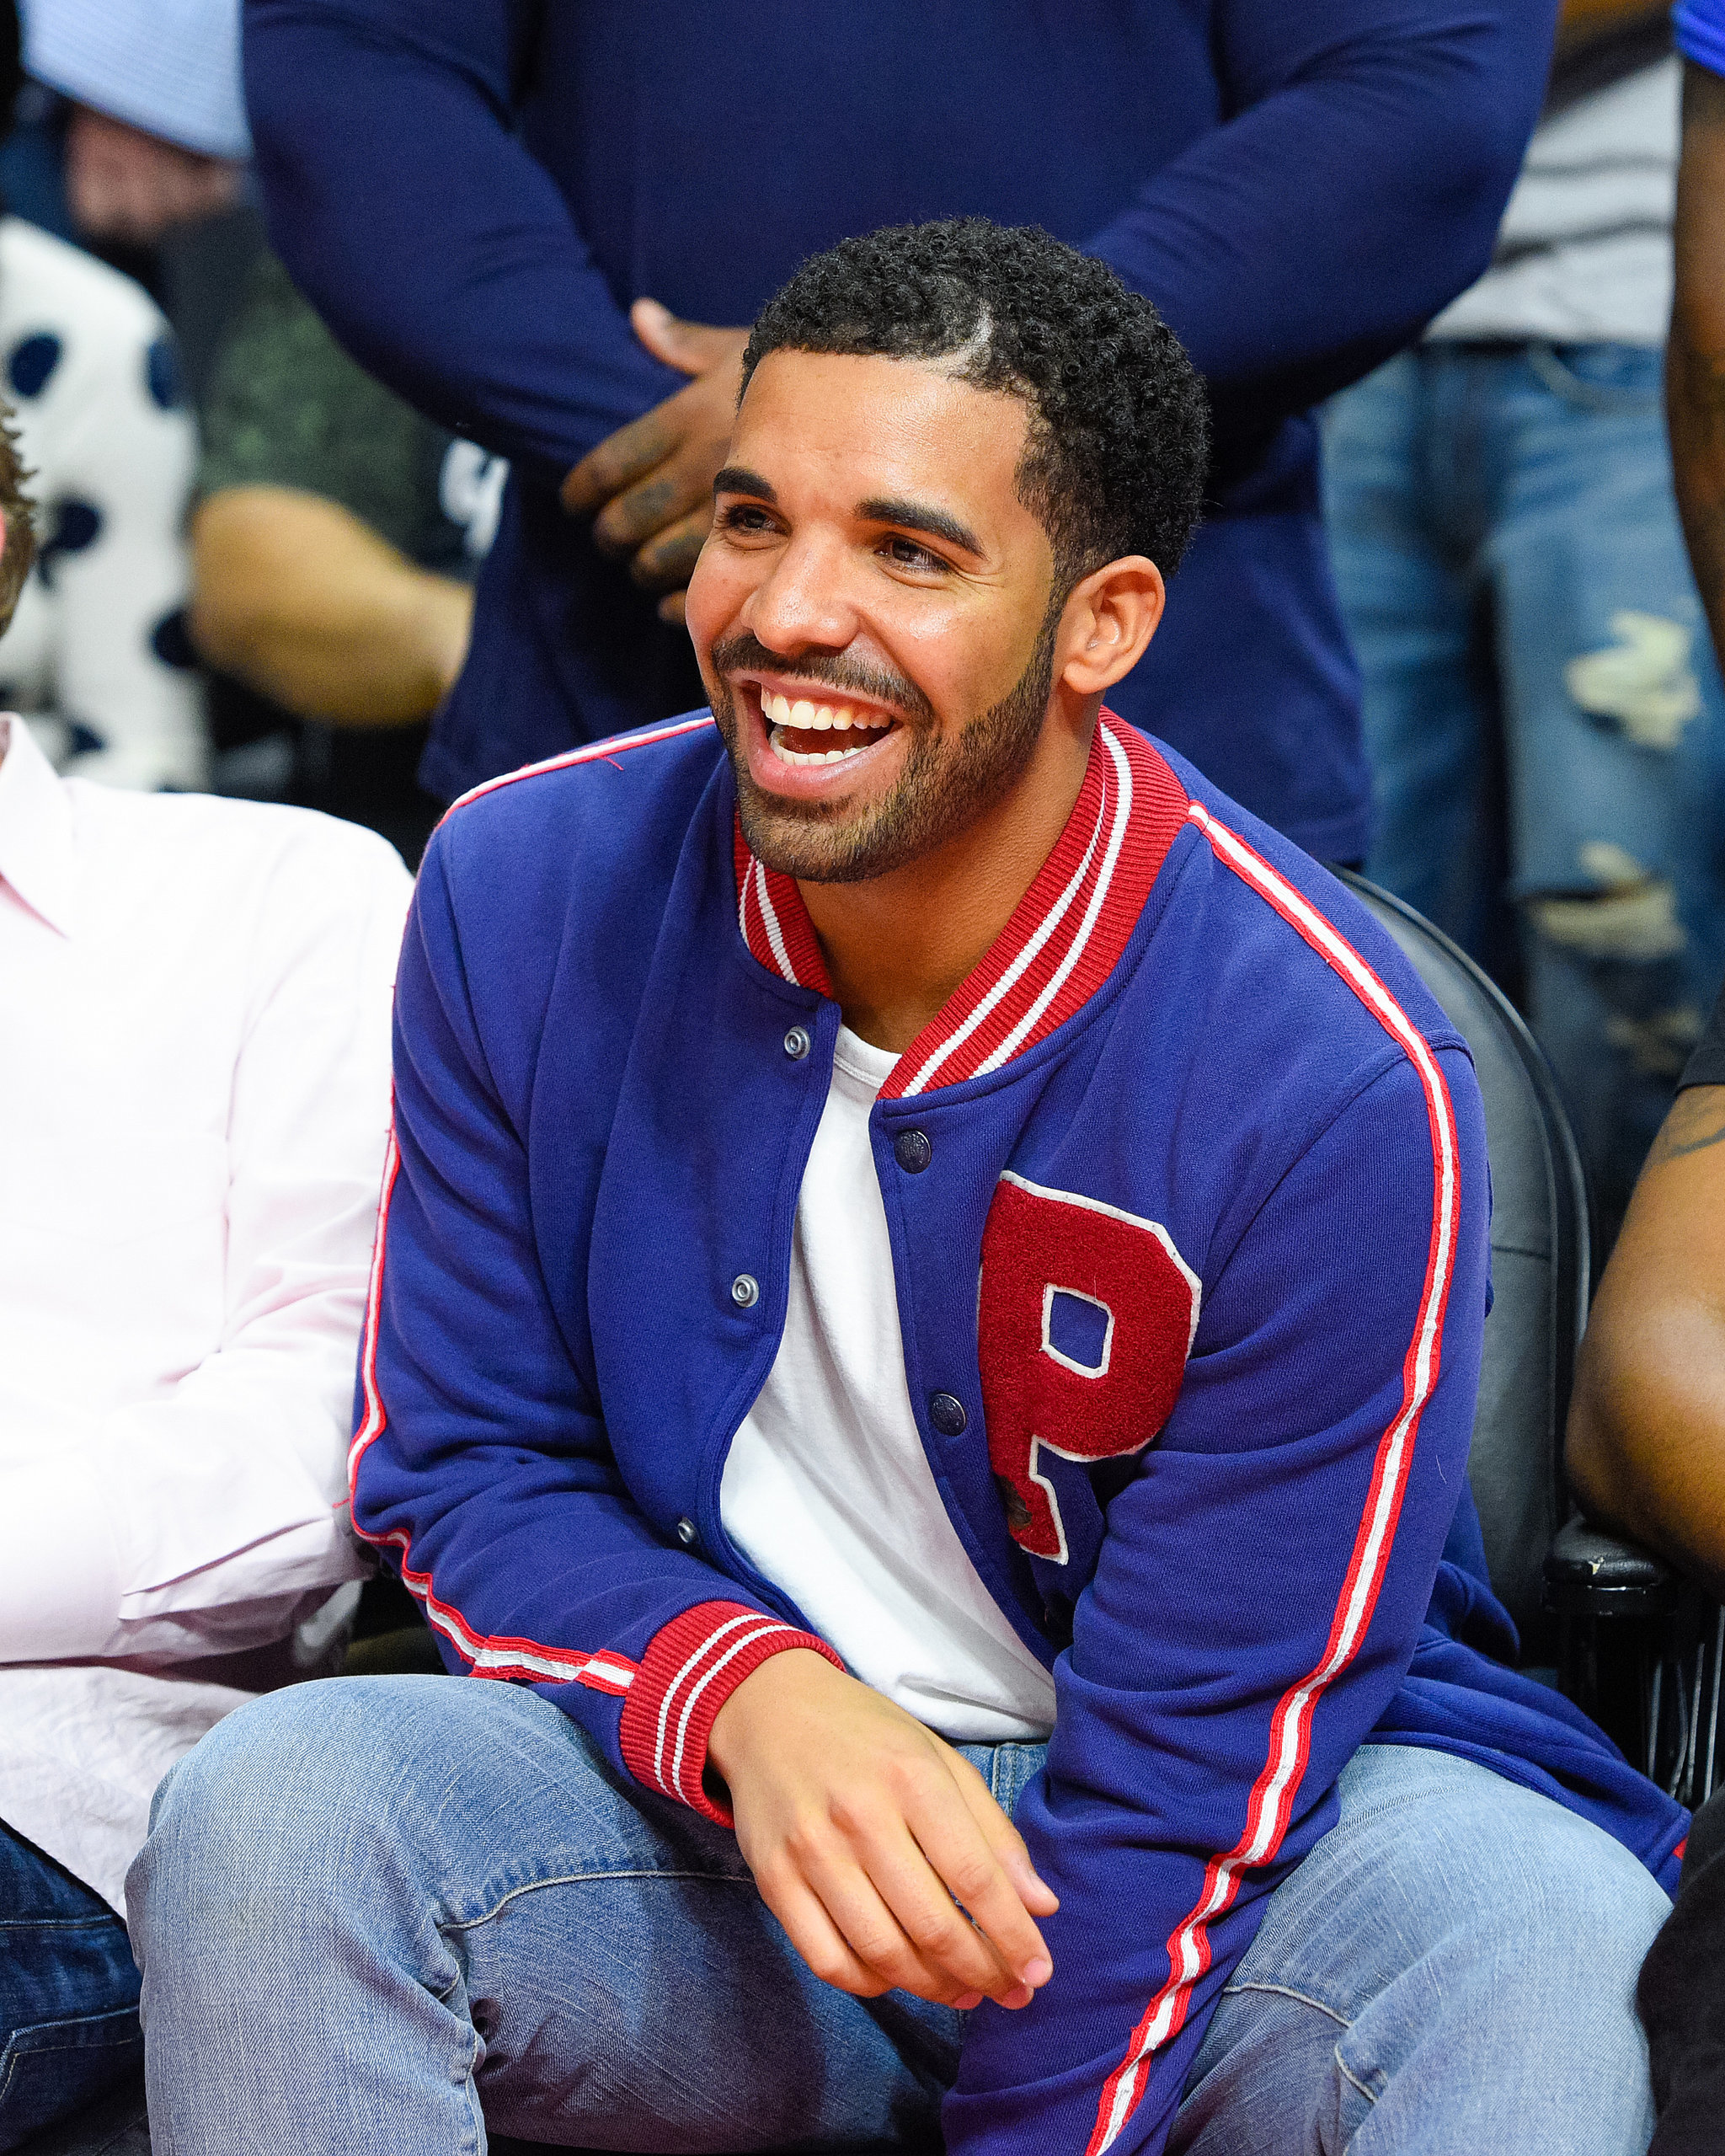 Drake-brought-his-infectious-smile-Golden-State-Warriors-vs.jpg